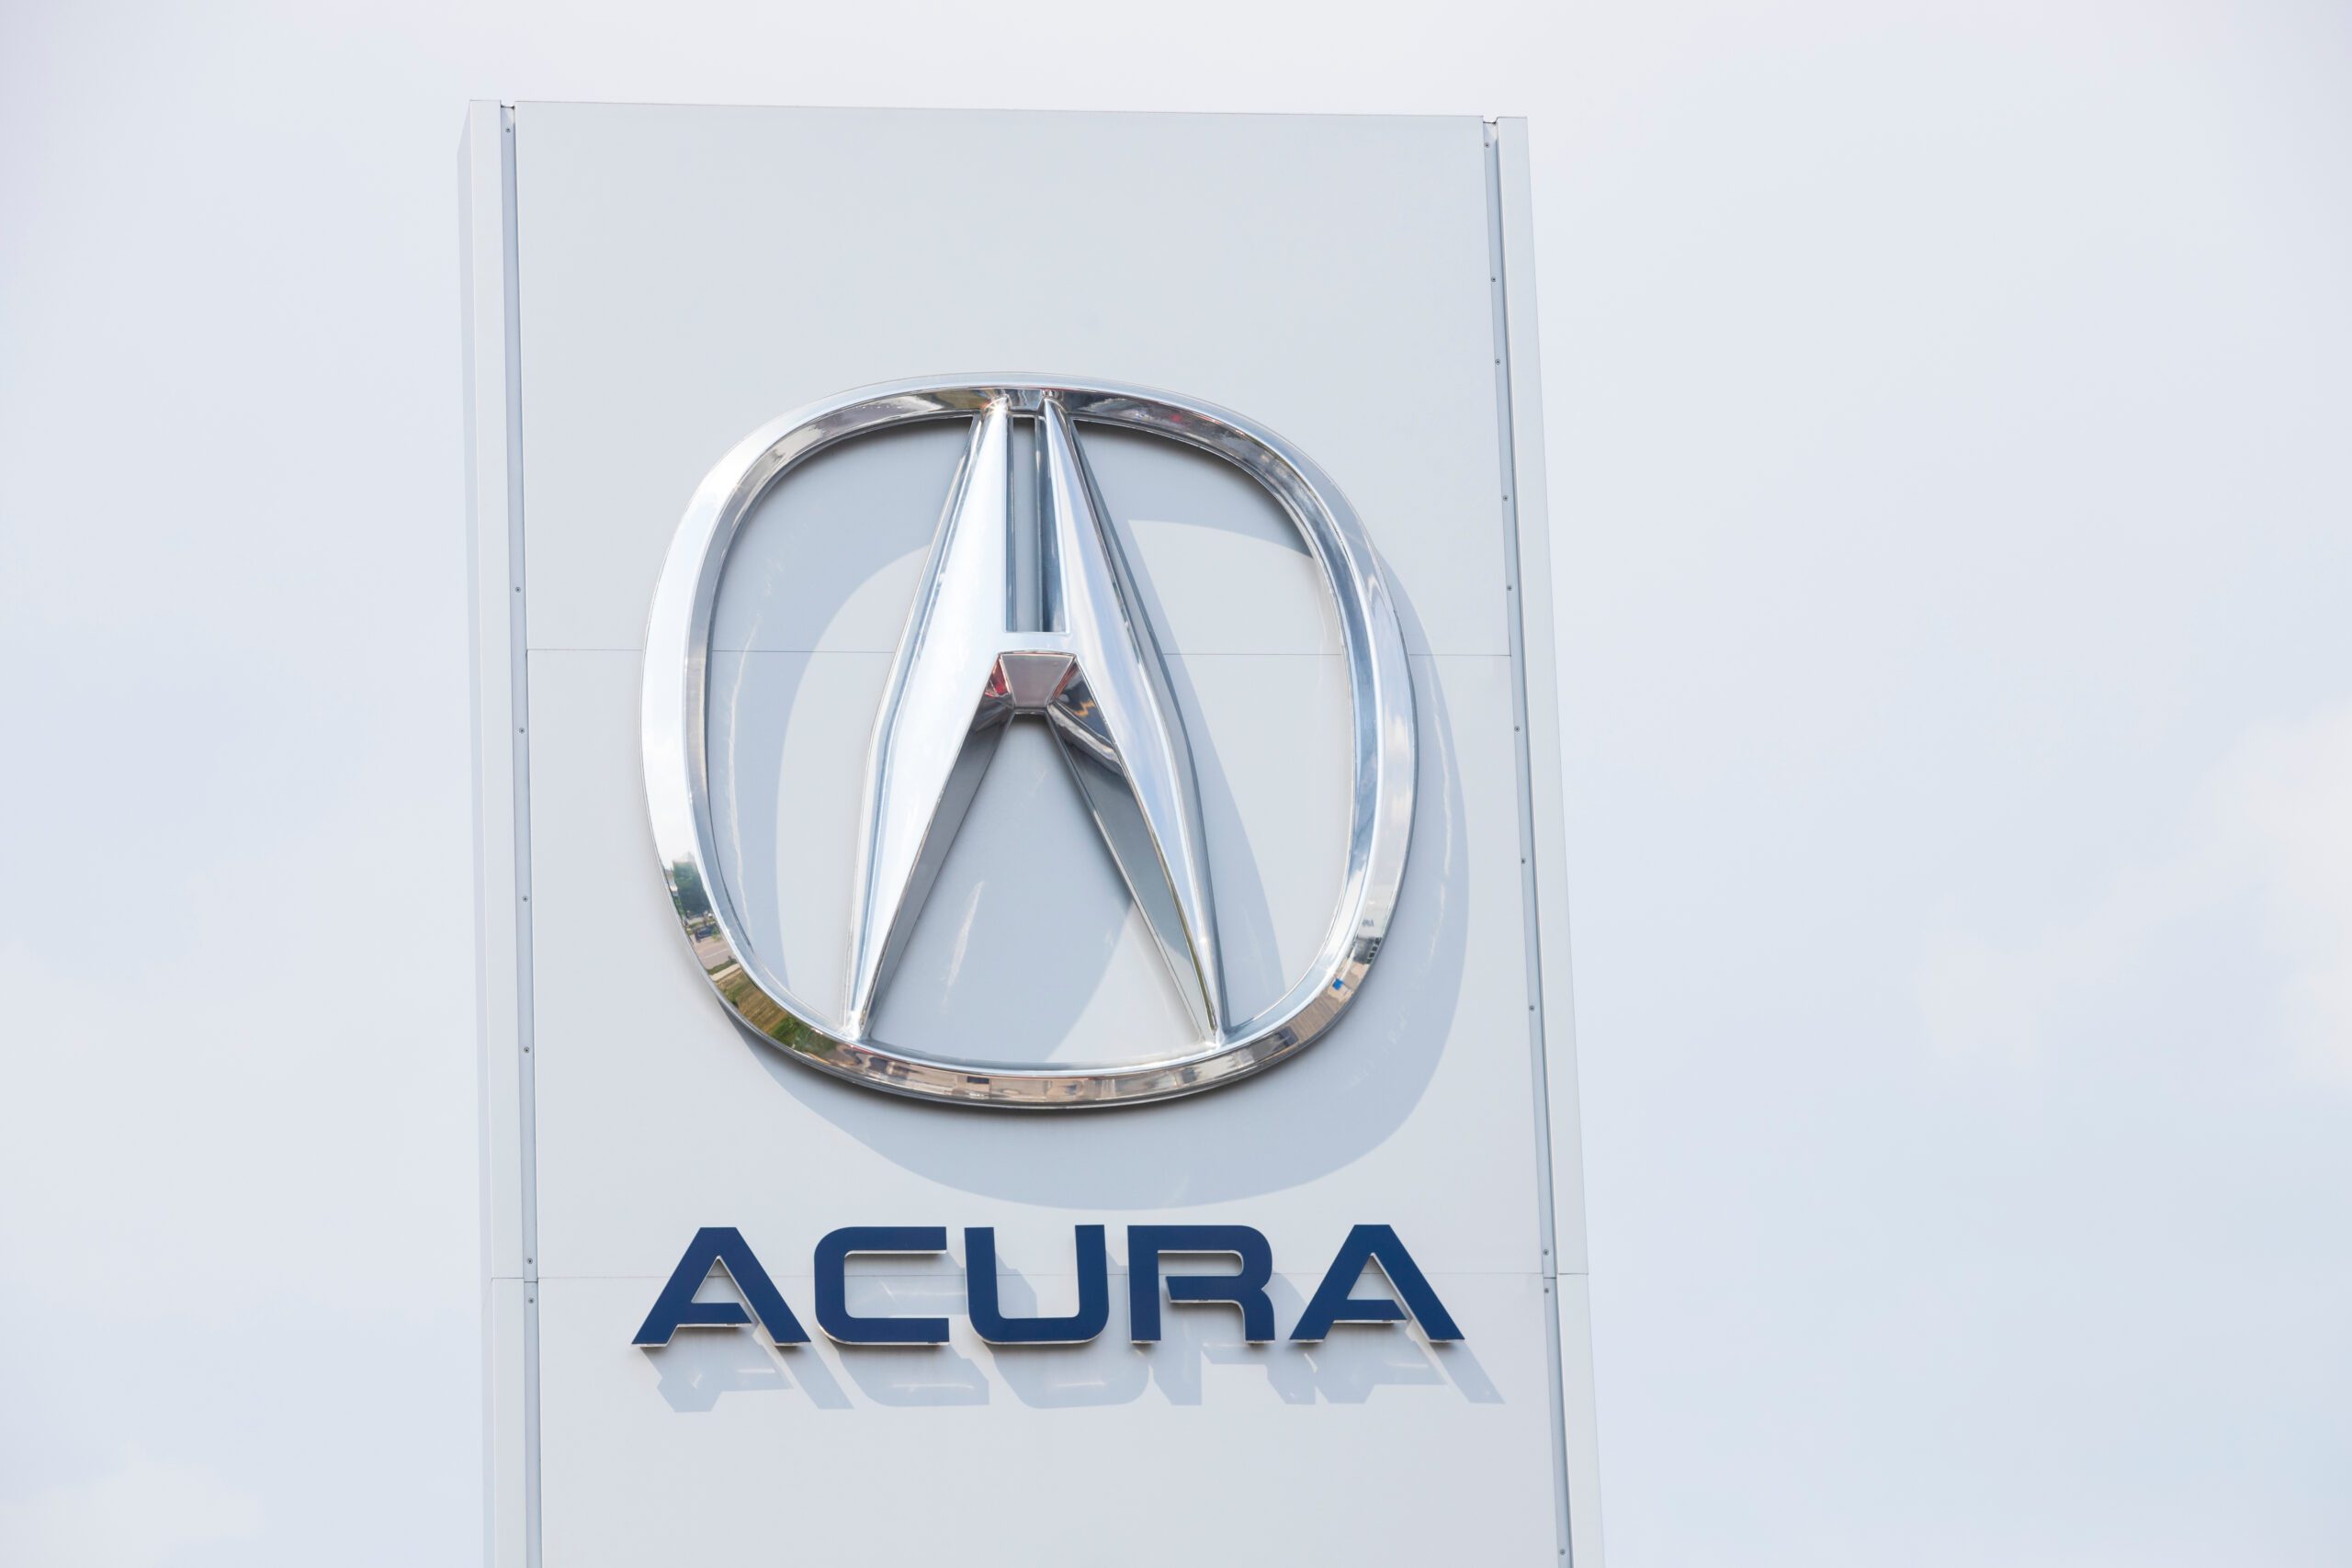 A lawsuit alleges the hands-free calling feature in certain Acura models drains the battery